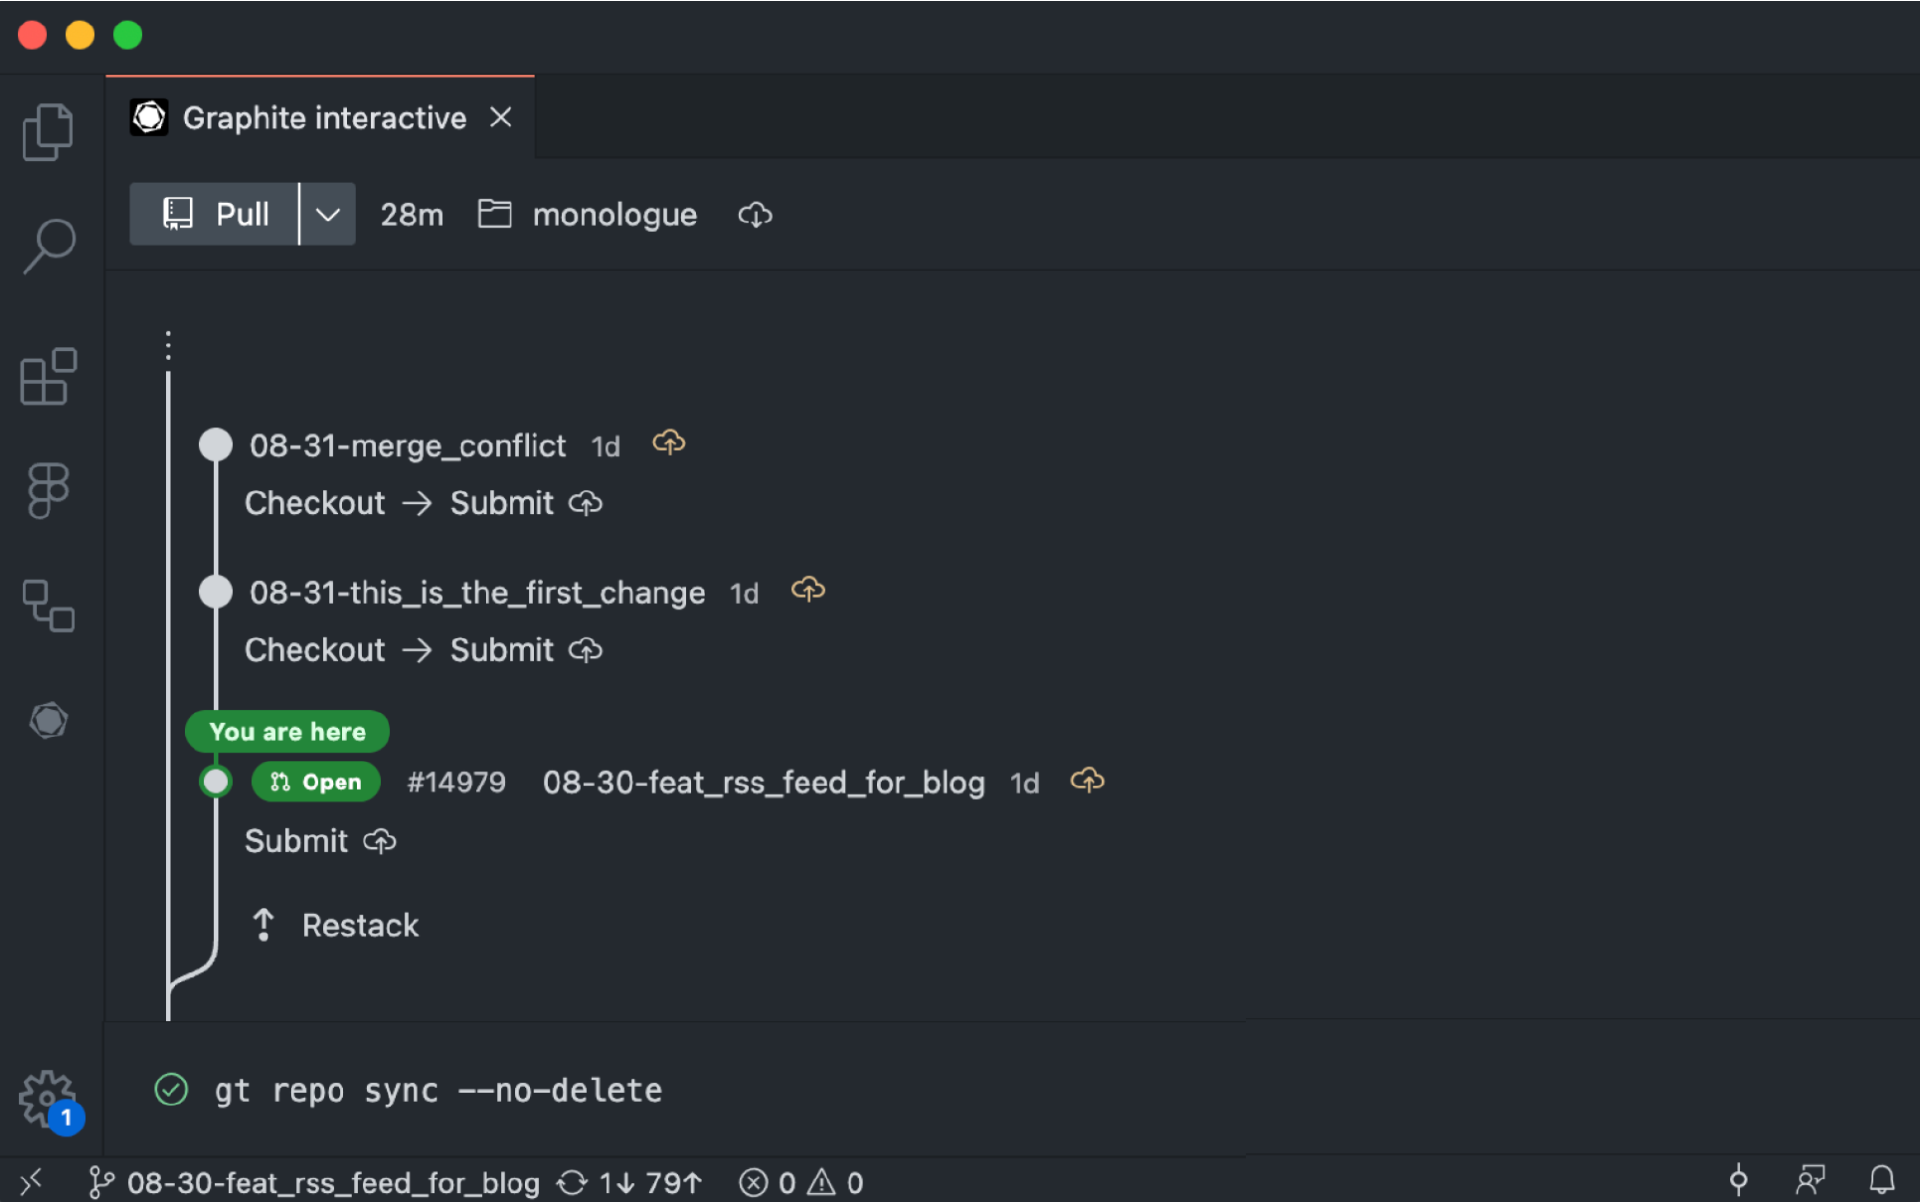 graphite interactive screenshot showing a pull request  in the stacking review chain and pinpointing status with "you are here"